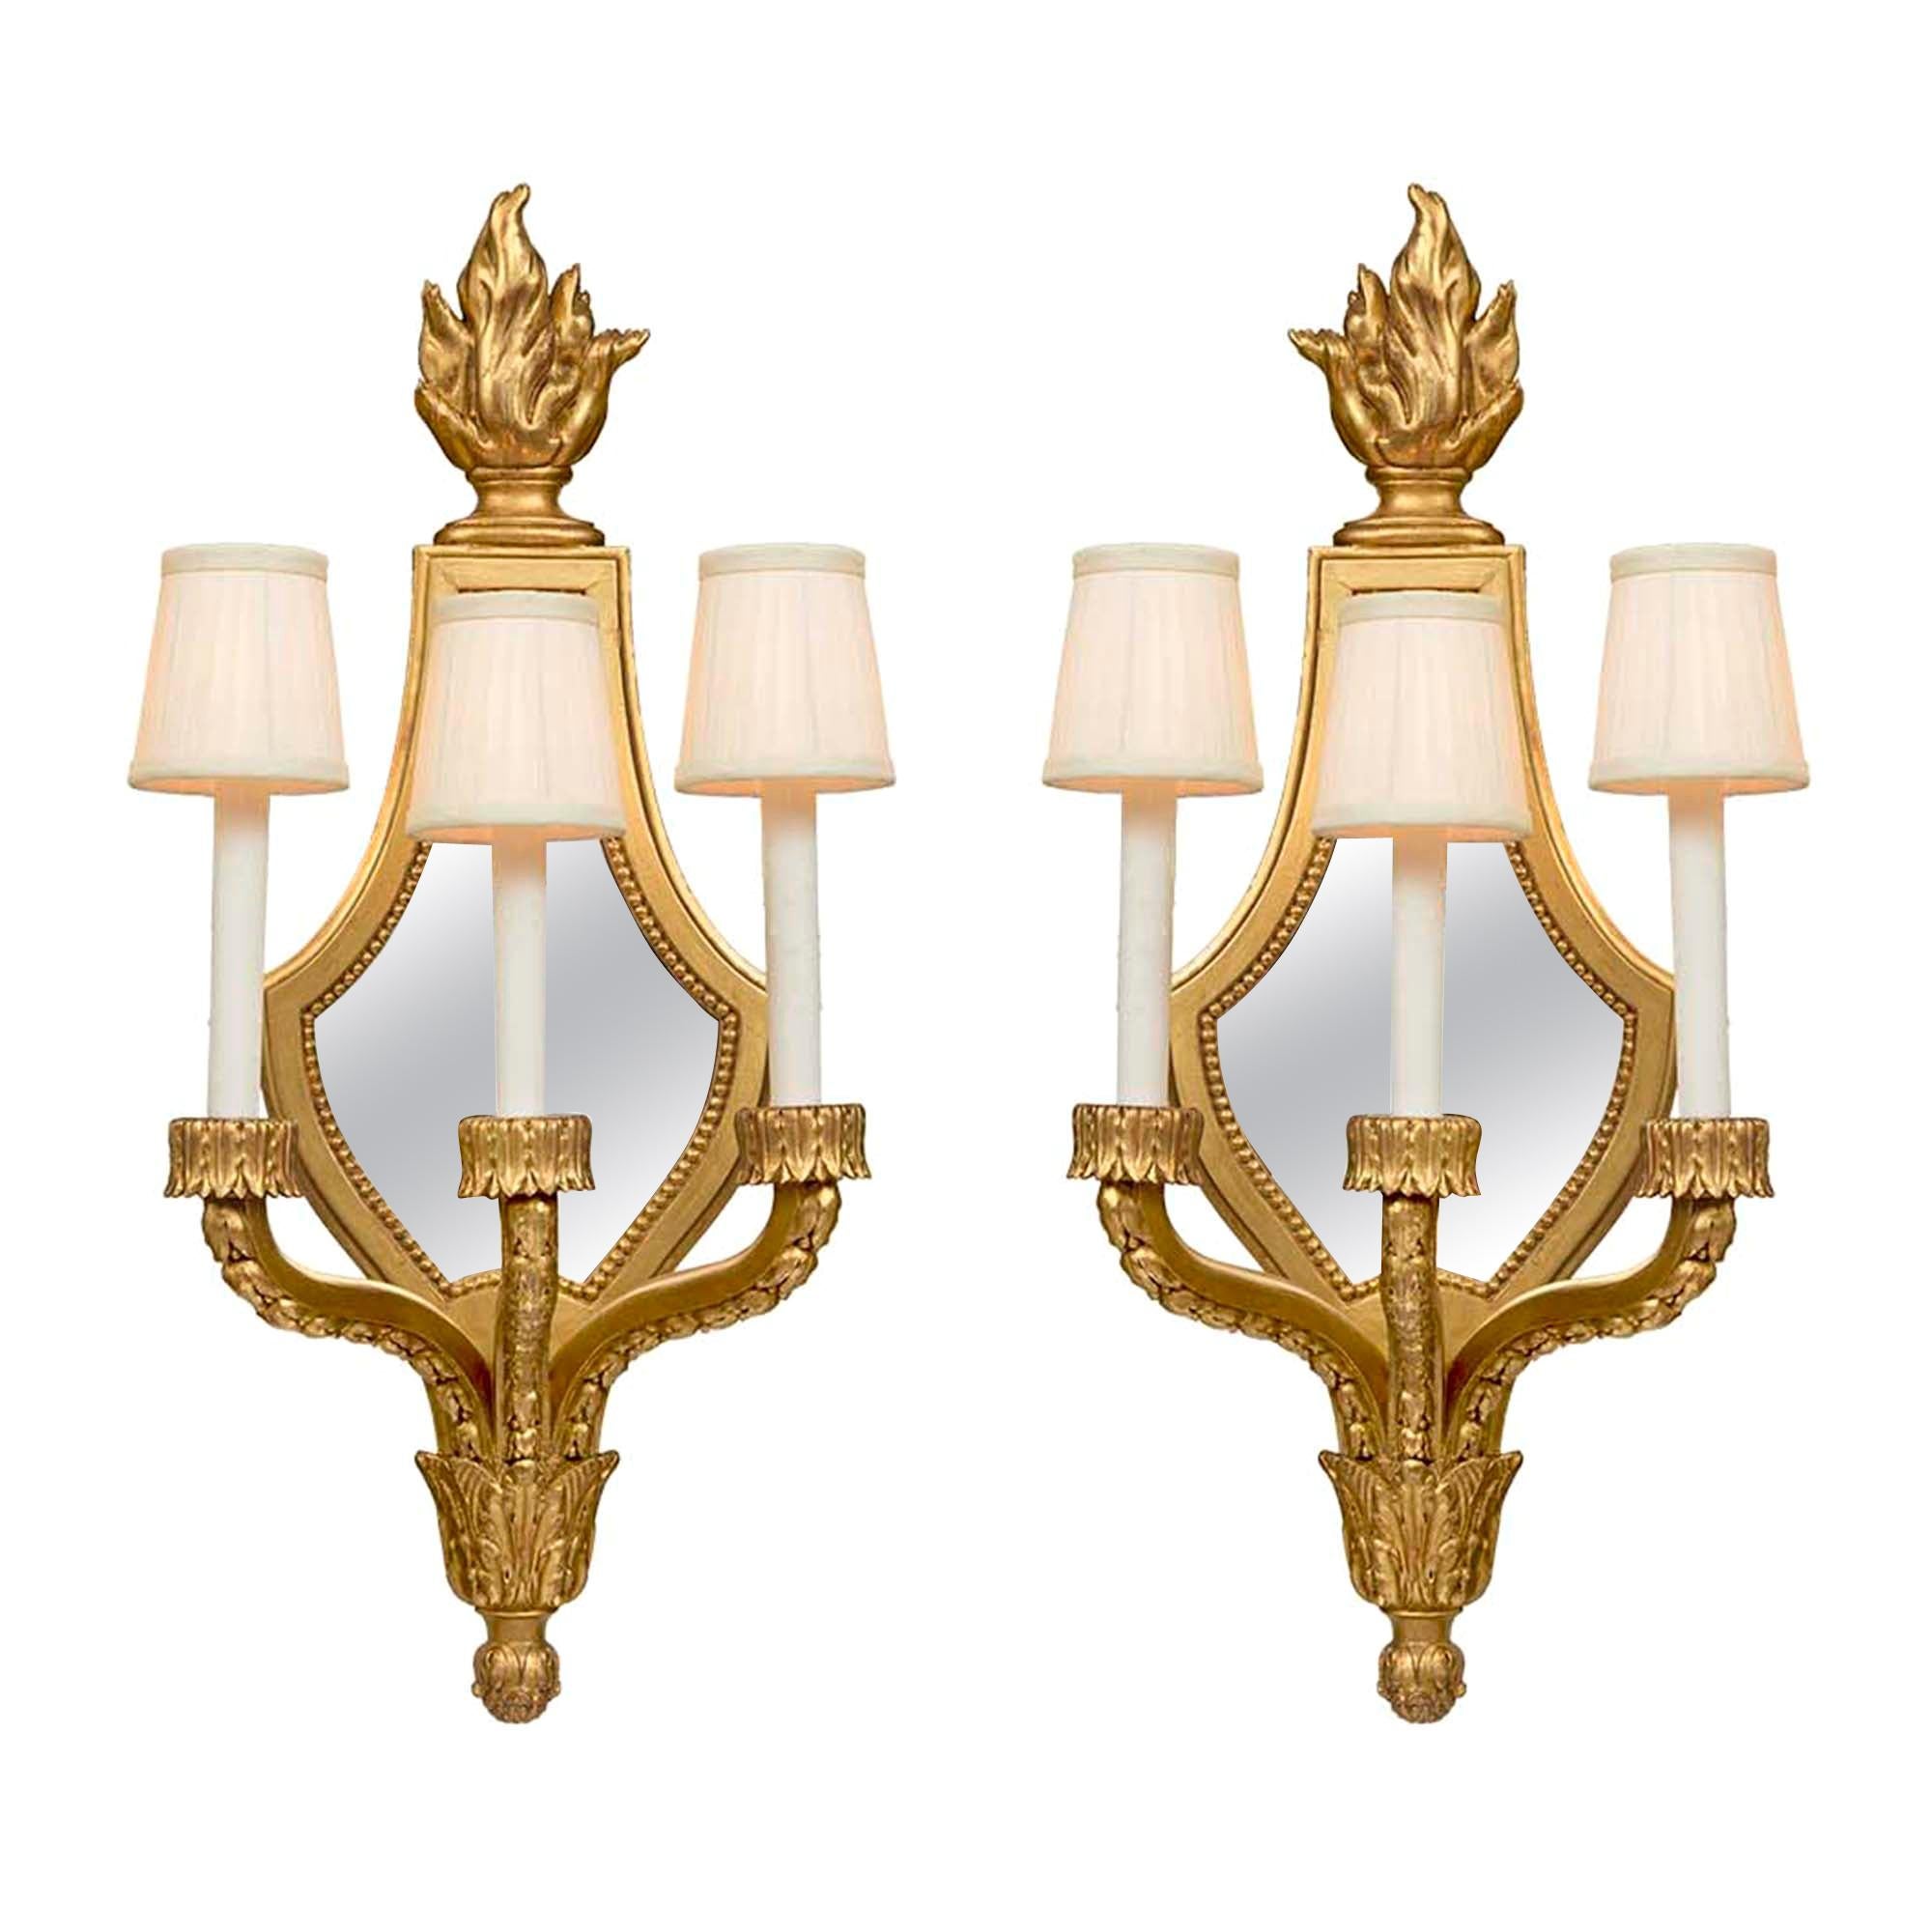 Pair of French 19th Century Louis XVI Style Giltwood Mirrored Sconces